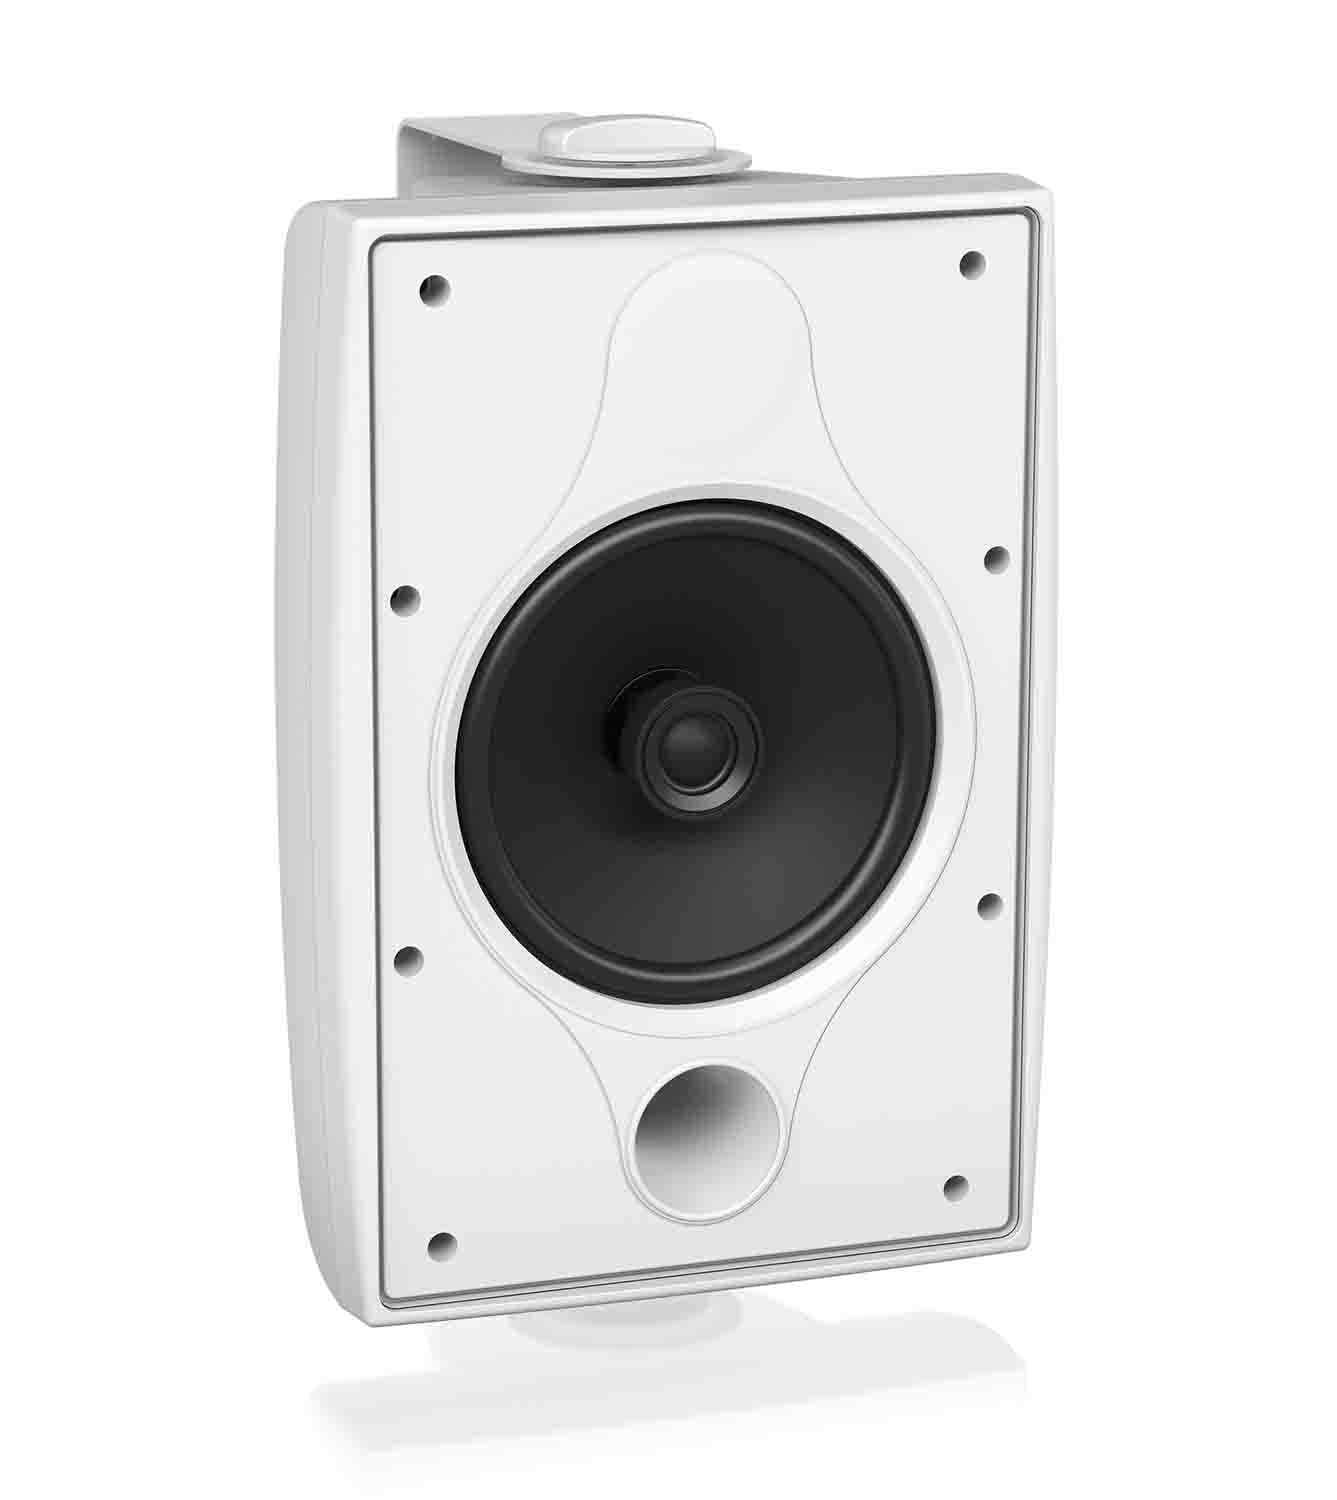 Tannoy DVS 6-WH, 6-Inch Coaxial Surface-Mount Loudspeaker - White - Hollywood DJ